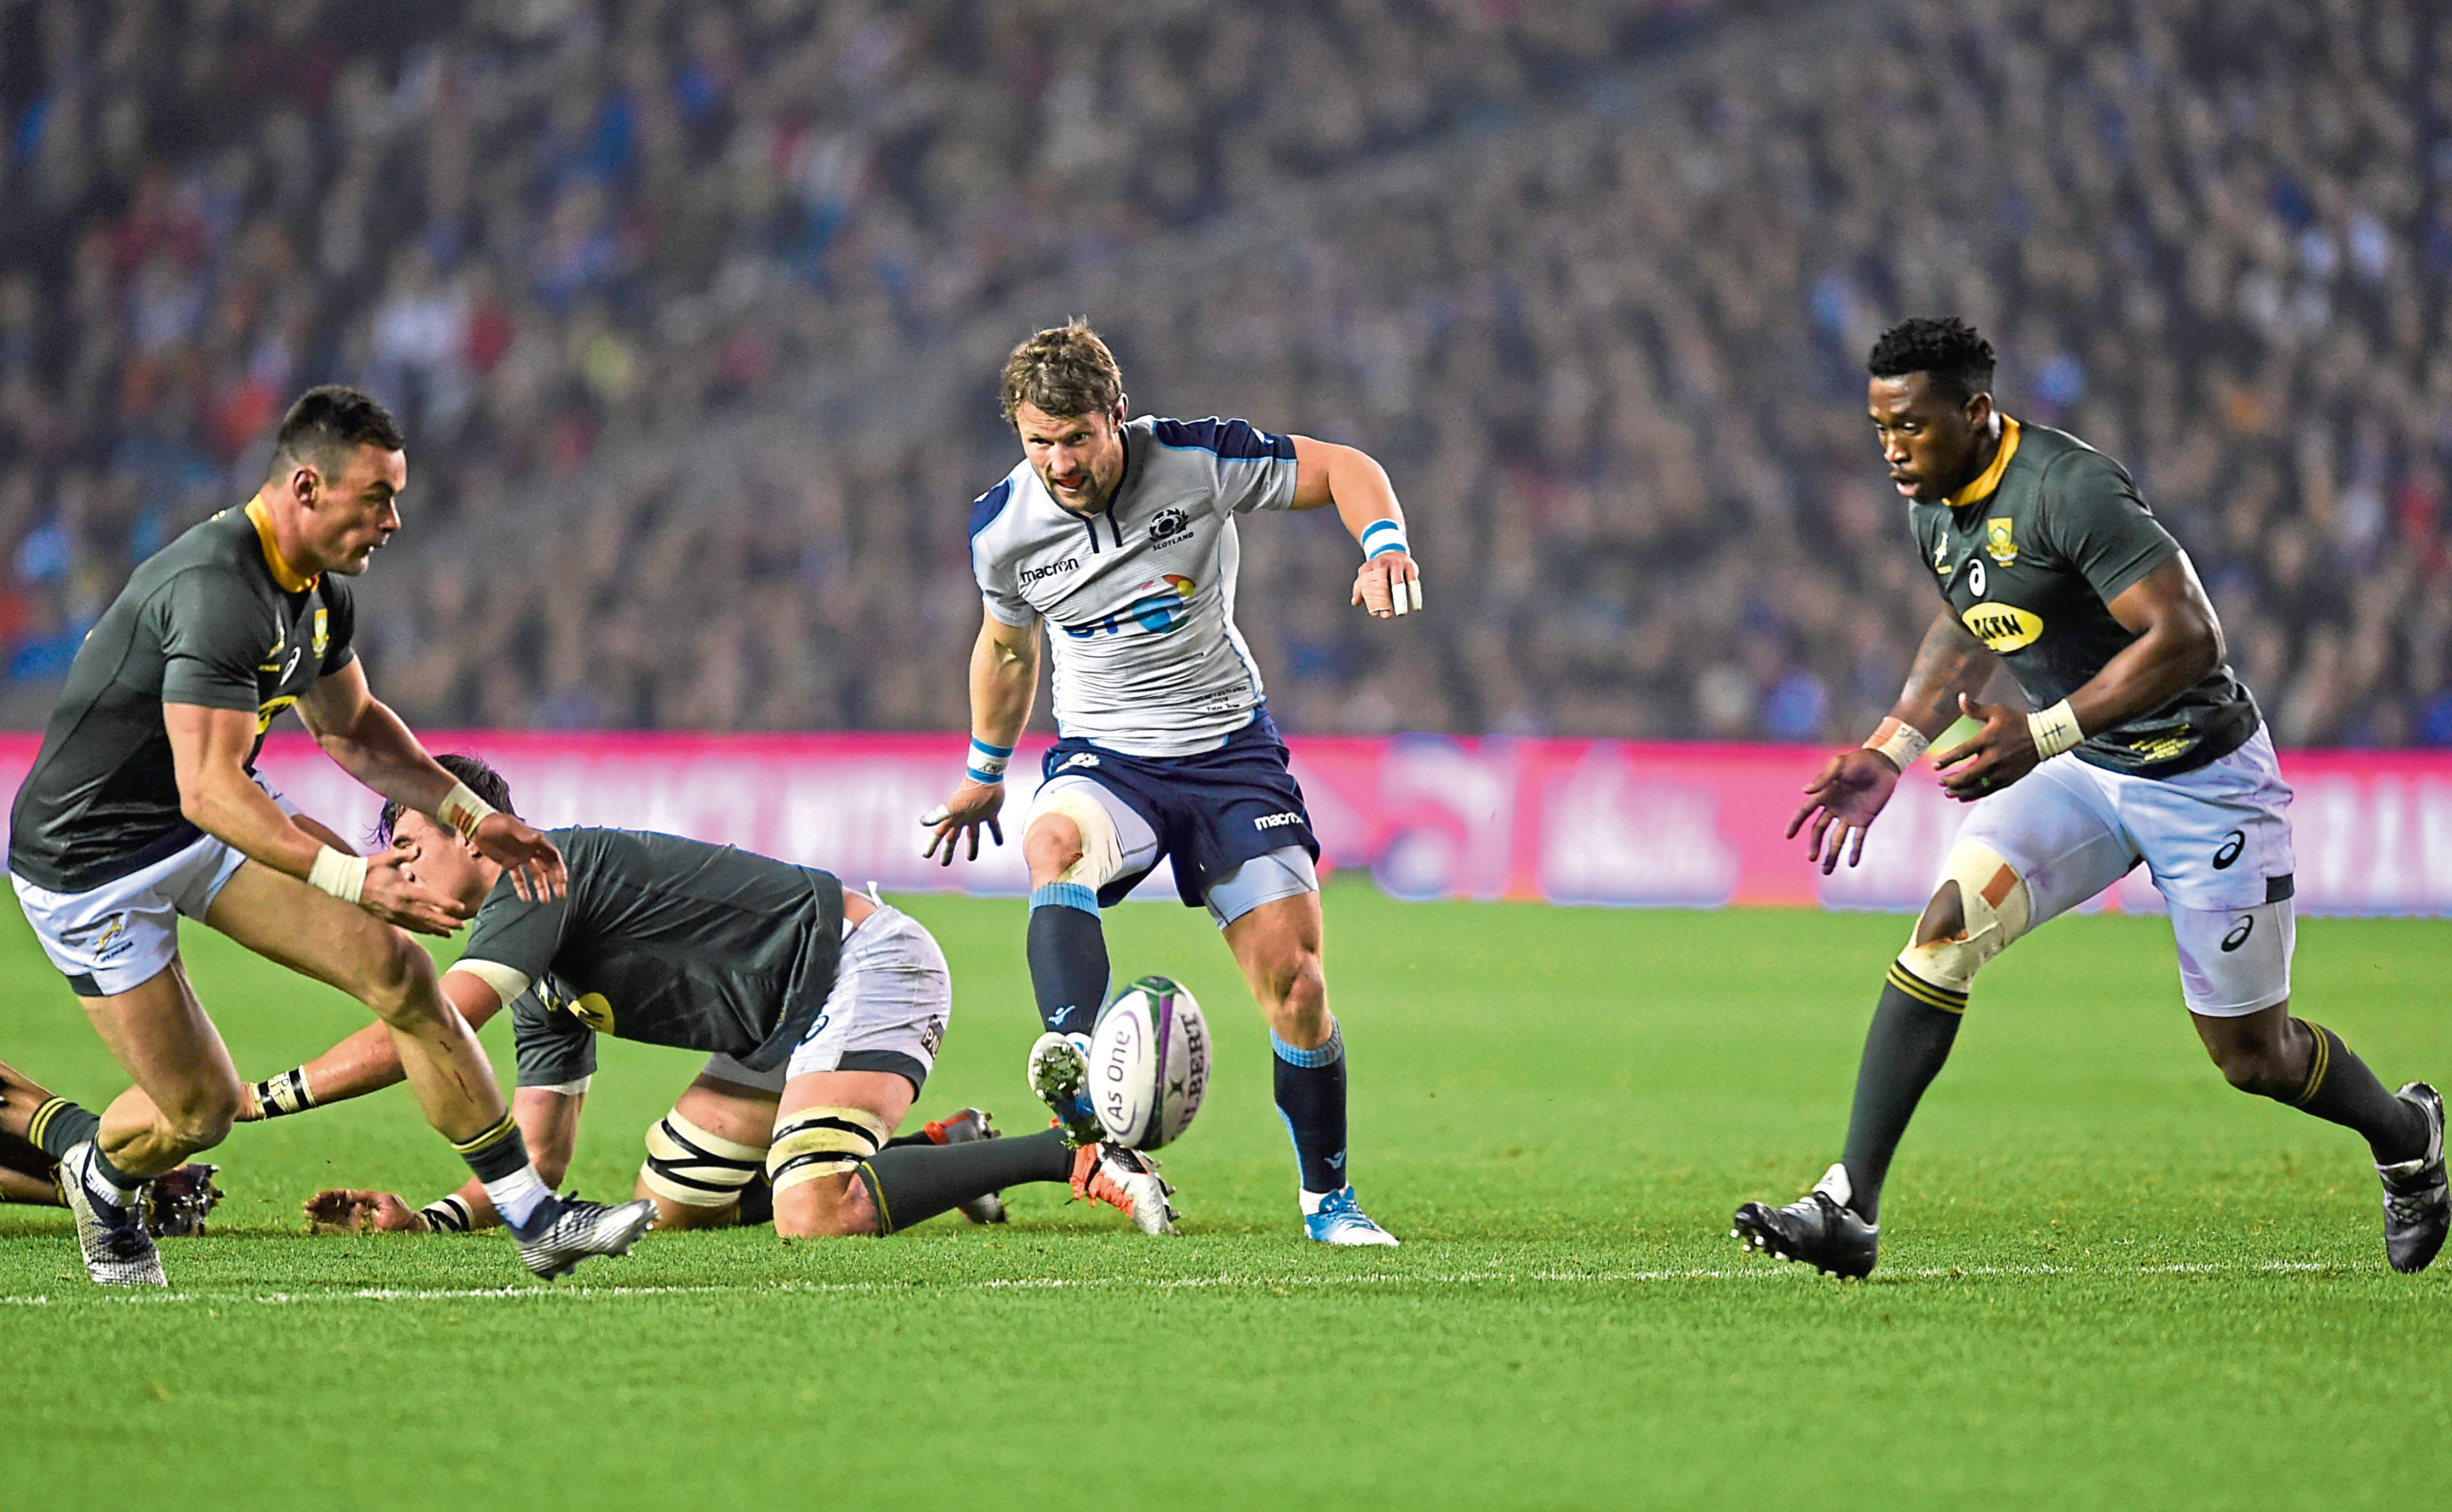 Scotland's Peter Horne hacks the ball on with Jesse Kriel and Siya Kolisi of South Africa looking on during the Autumn International match at BT Murrayfield, Edinburgh. PRESS ASSOCIATION Photo. Picture date: Saturday November 17, 2018. See PA story RUGBYU Scotland. Photo credit should read: Ian Rutherford/PA Wire. RESTRICTIONS: Editorial use only, No commercial use without prior permission